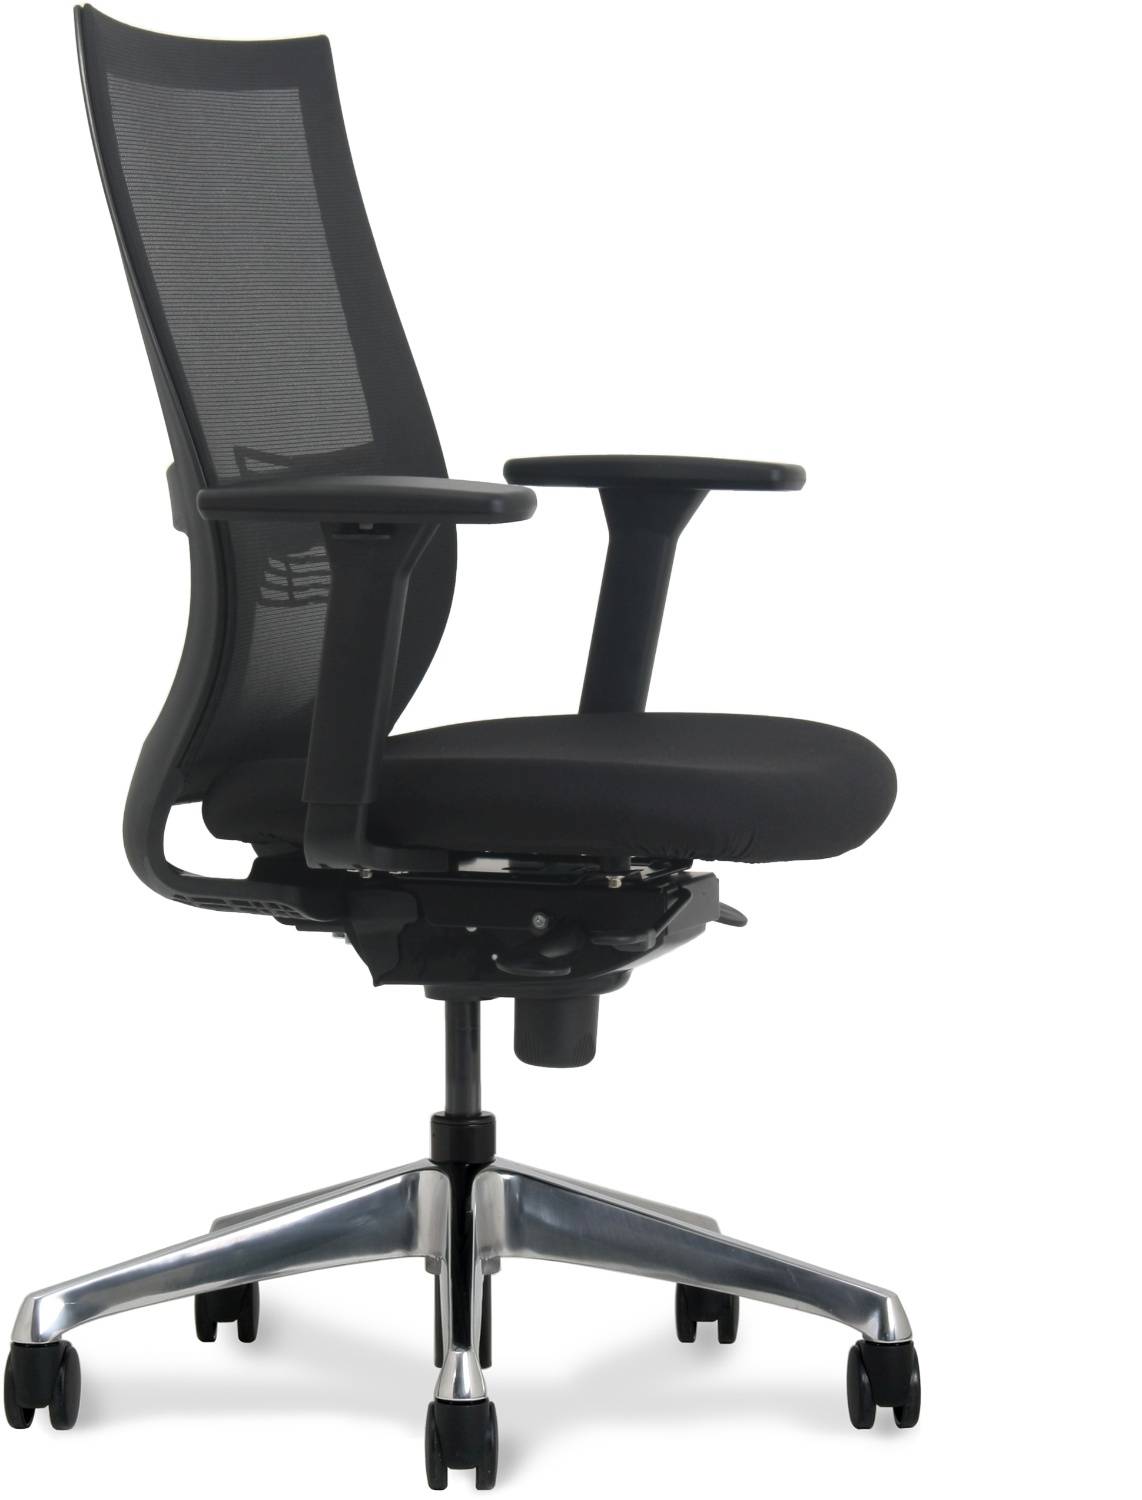 Office chair curve Soller